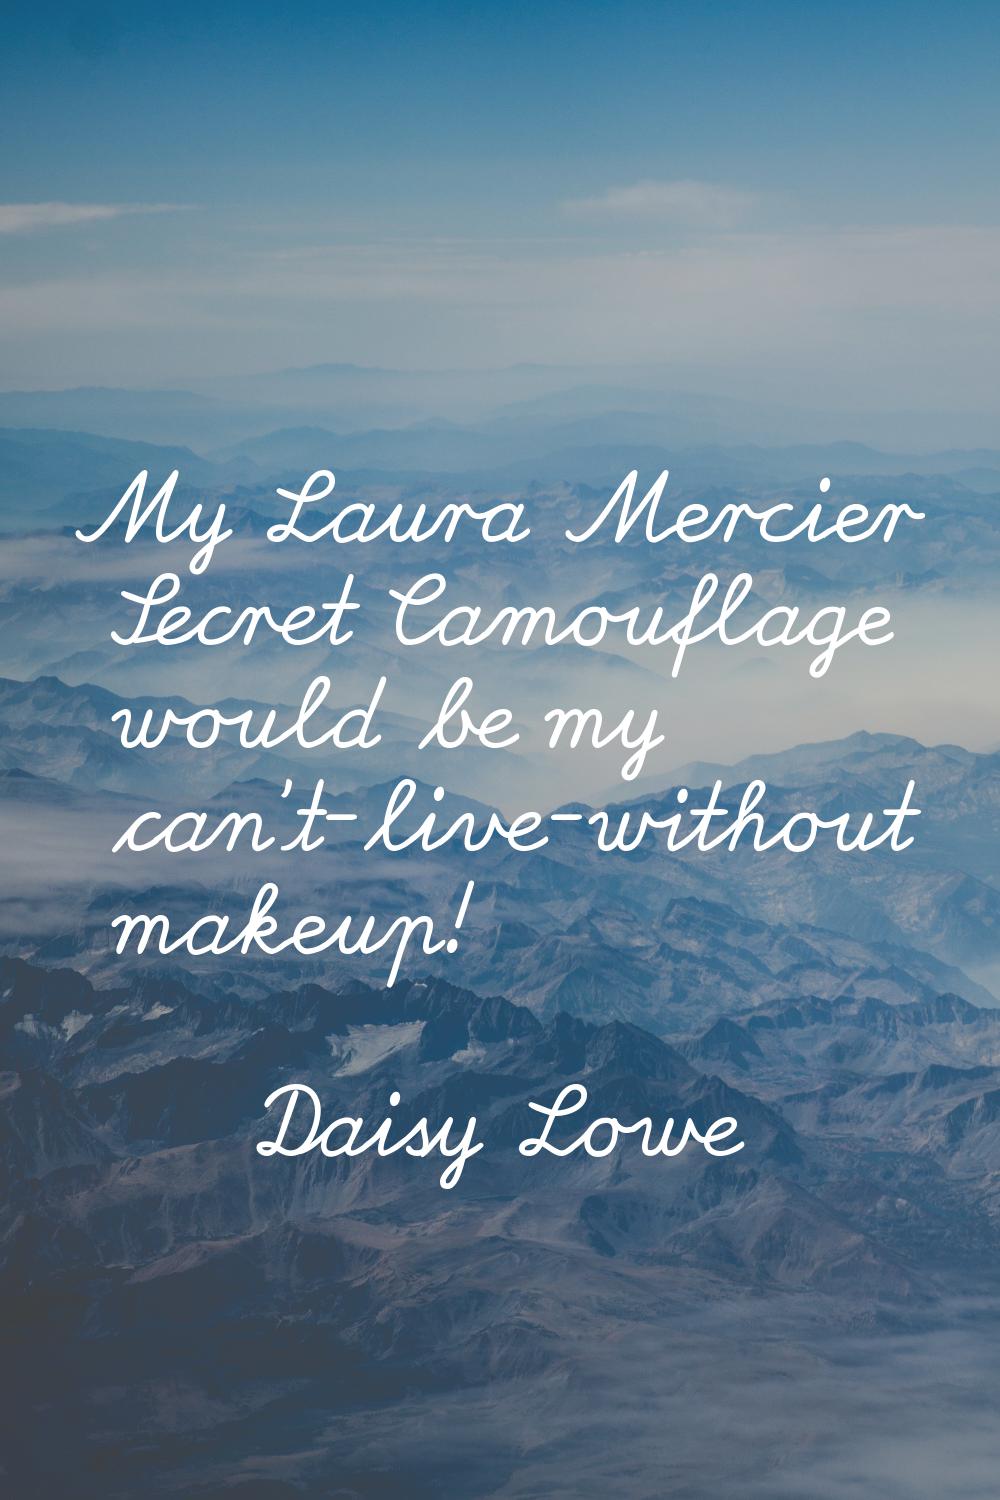 My Laura Mercier Secret Camouflage would be my can't-live-without makeup!